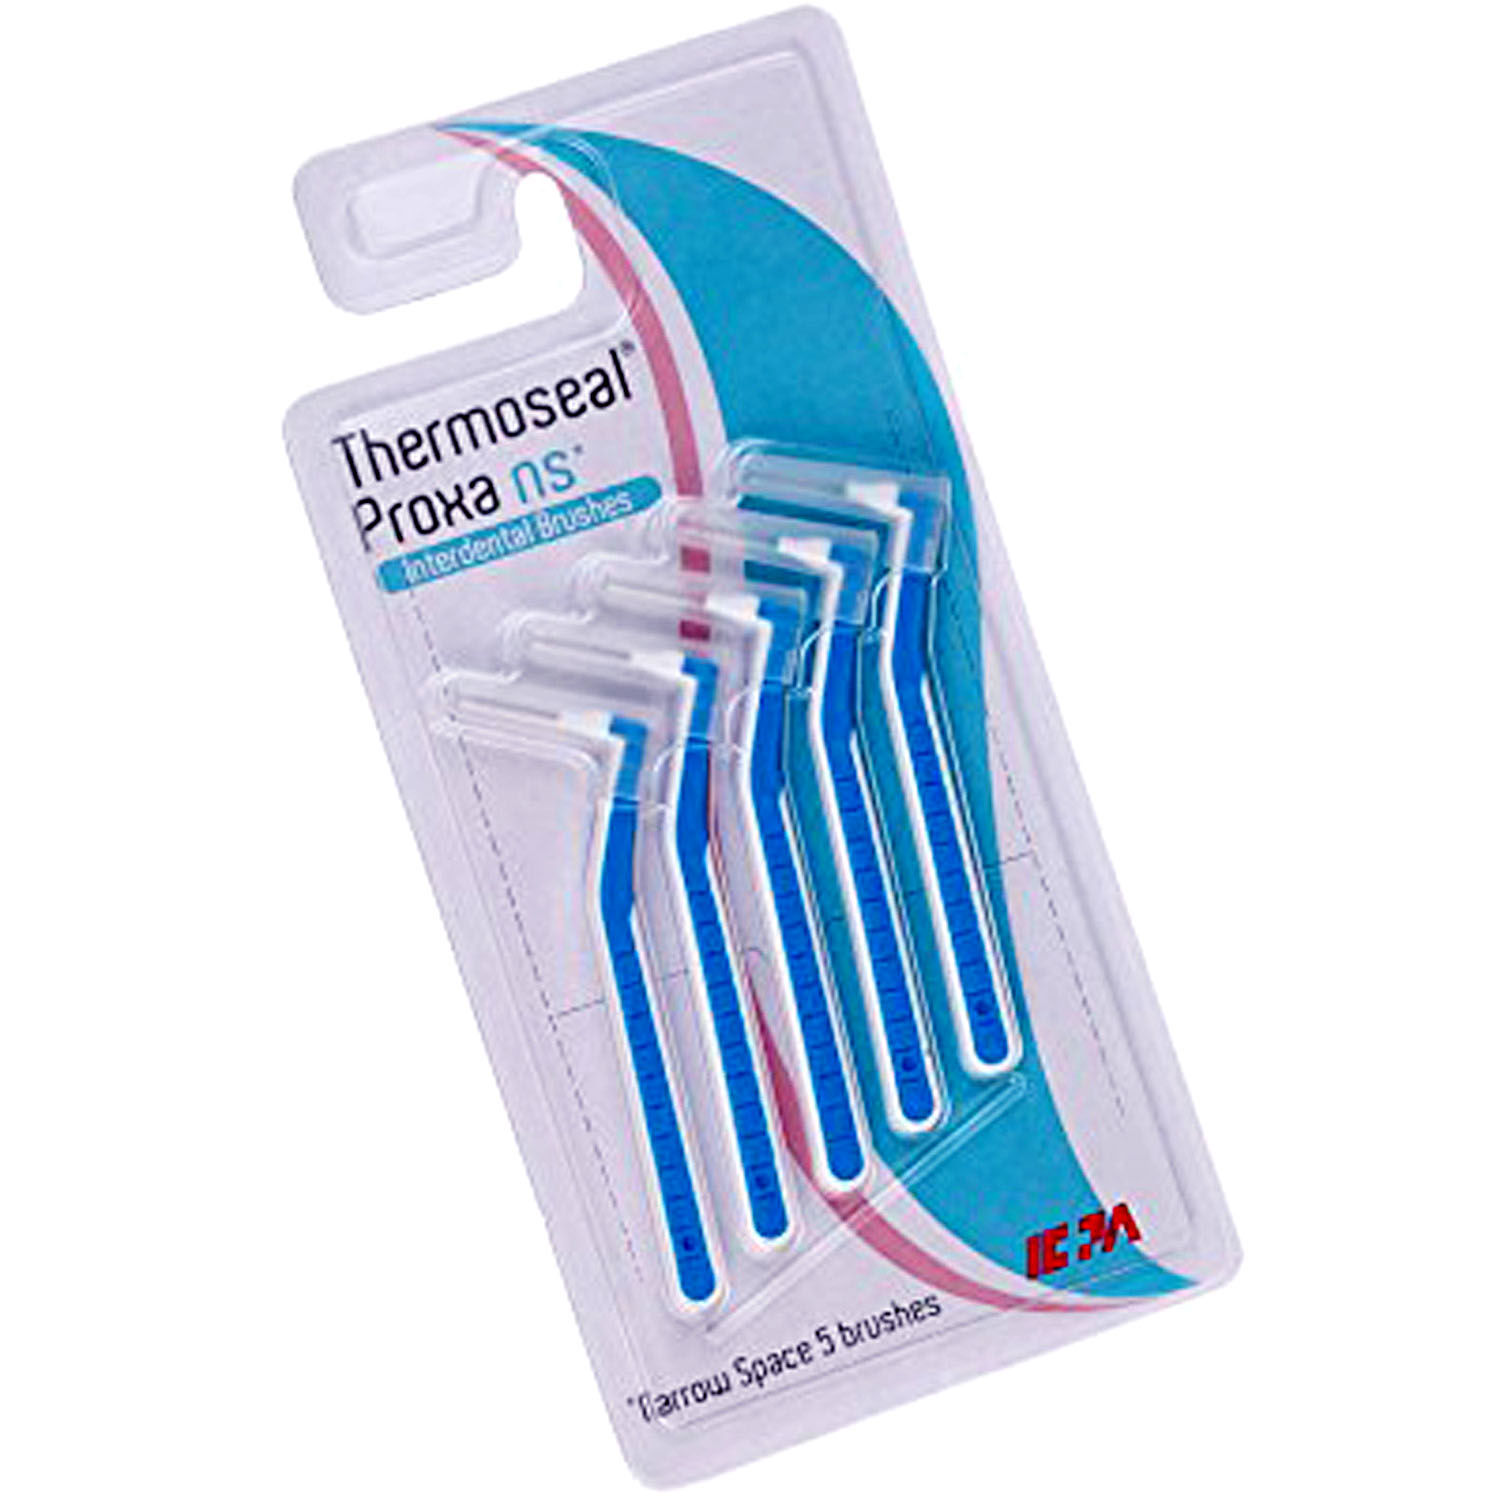 Thermoseal Proxa Narrow Space Interdental Brushes, 5 Count, Pack of 1 